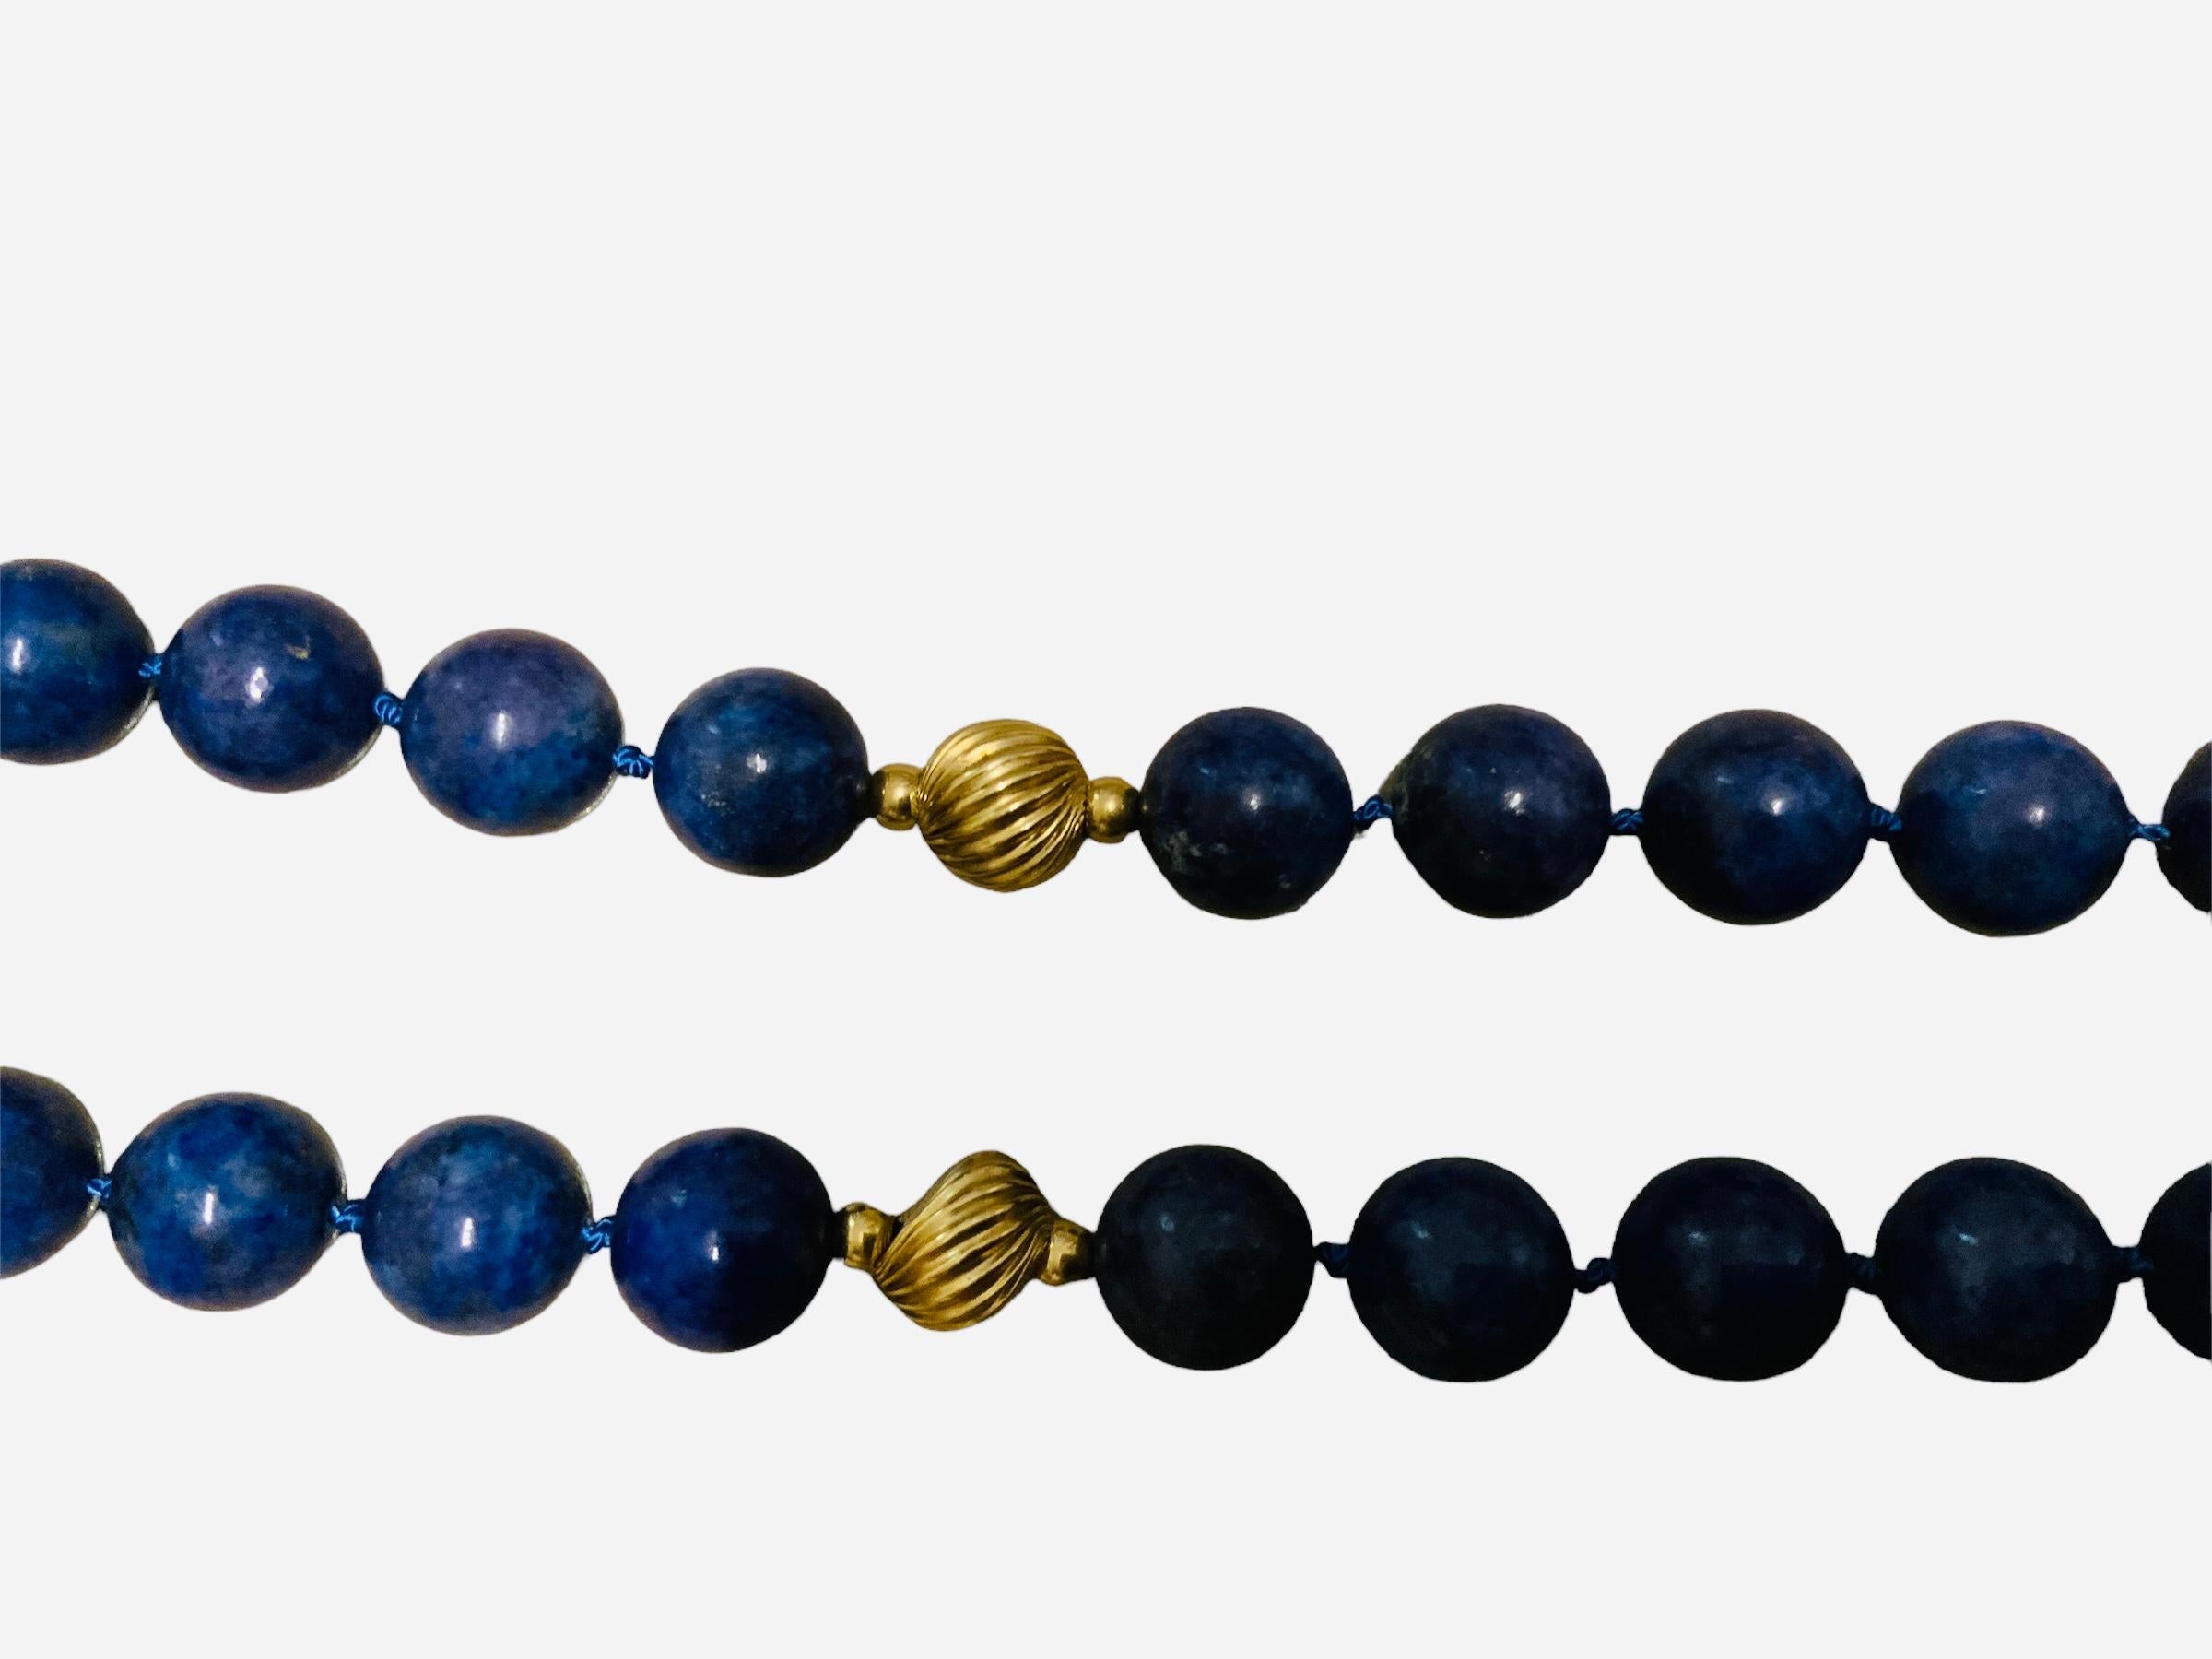 Women's Lapis Lazuli And Gold Beads Necklace  For Sale